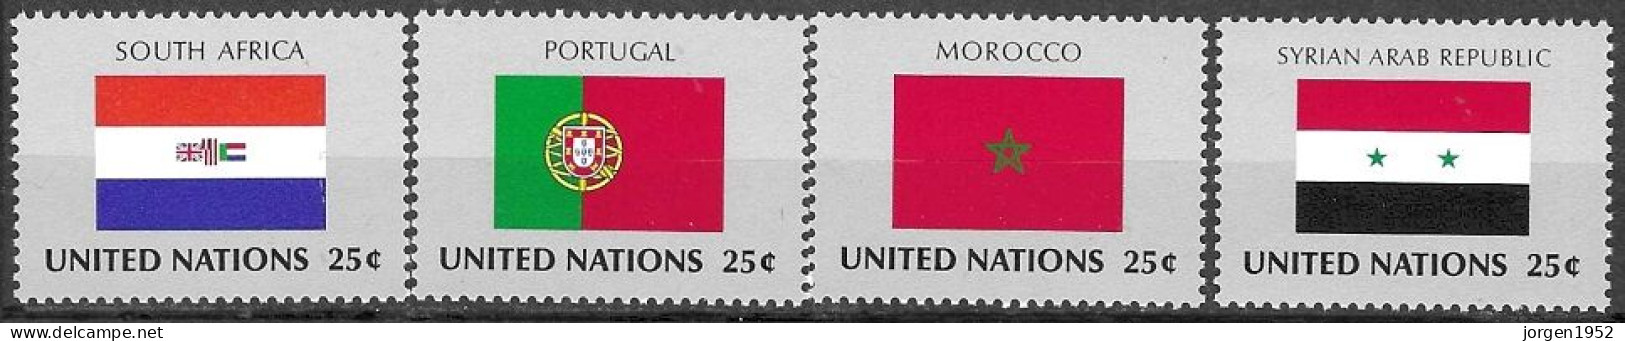 UNITED NATIONS # NEW YORK FROM 1988 STAMPWORLD 583-86** - New York/Geneva/Vienna Joint Issues